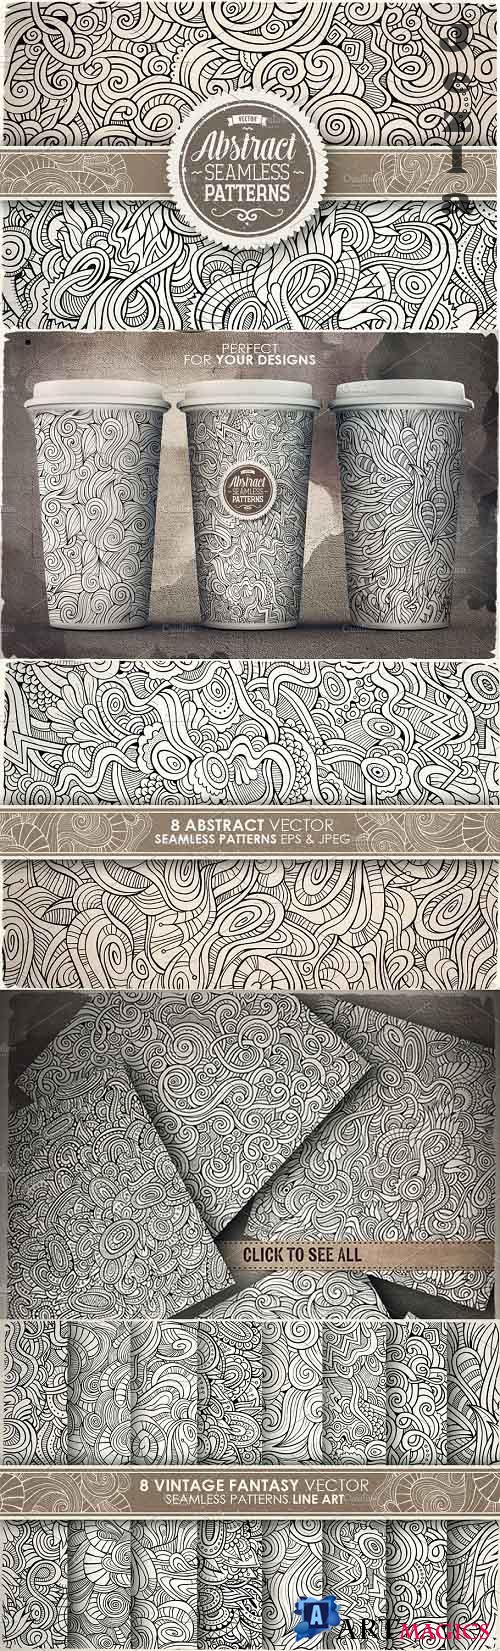 Abstract Patterns. Vol 1 - 583248